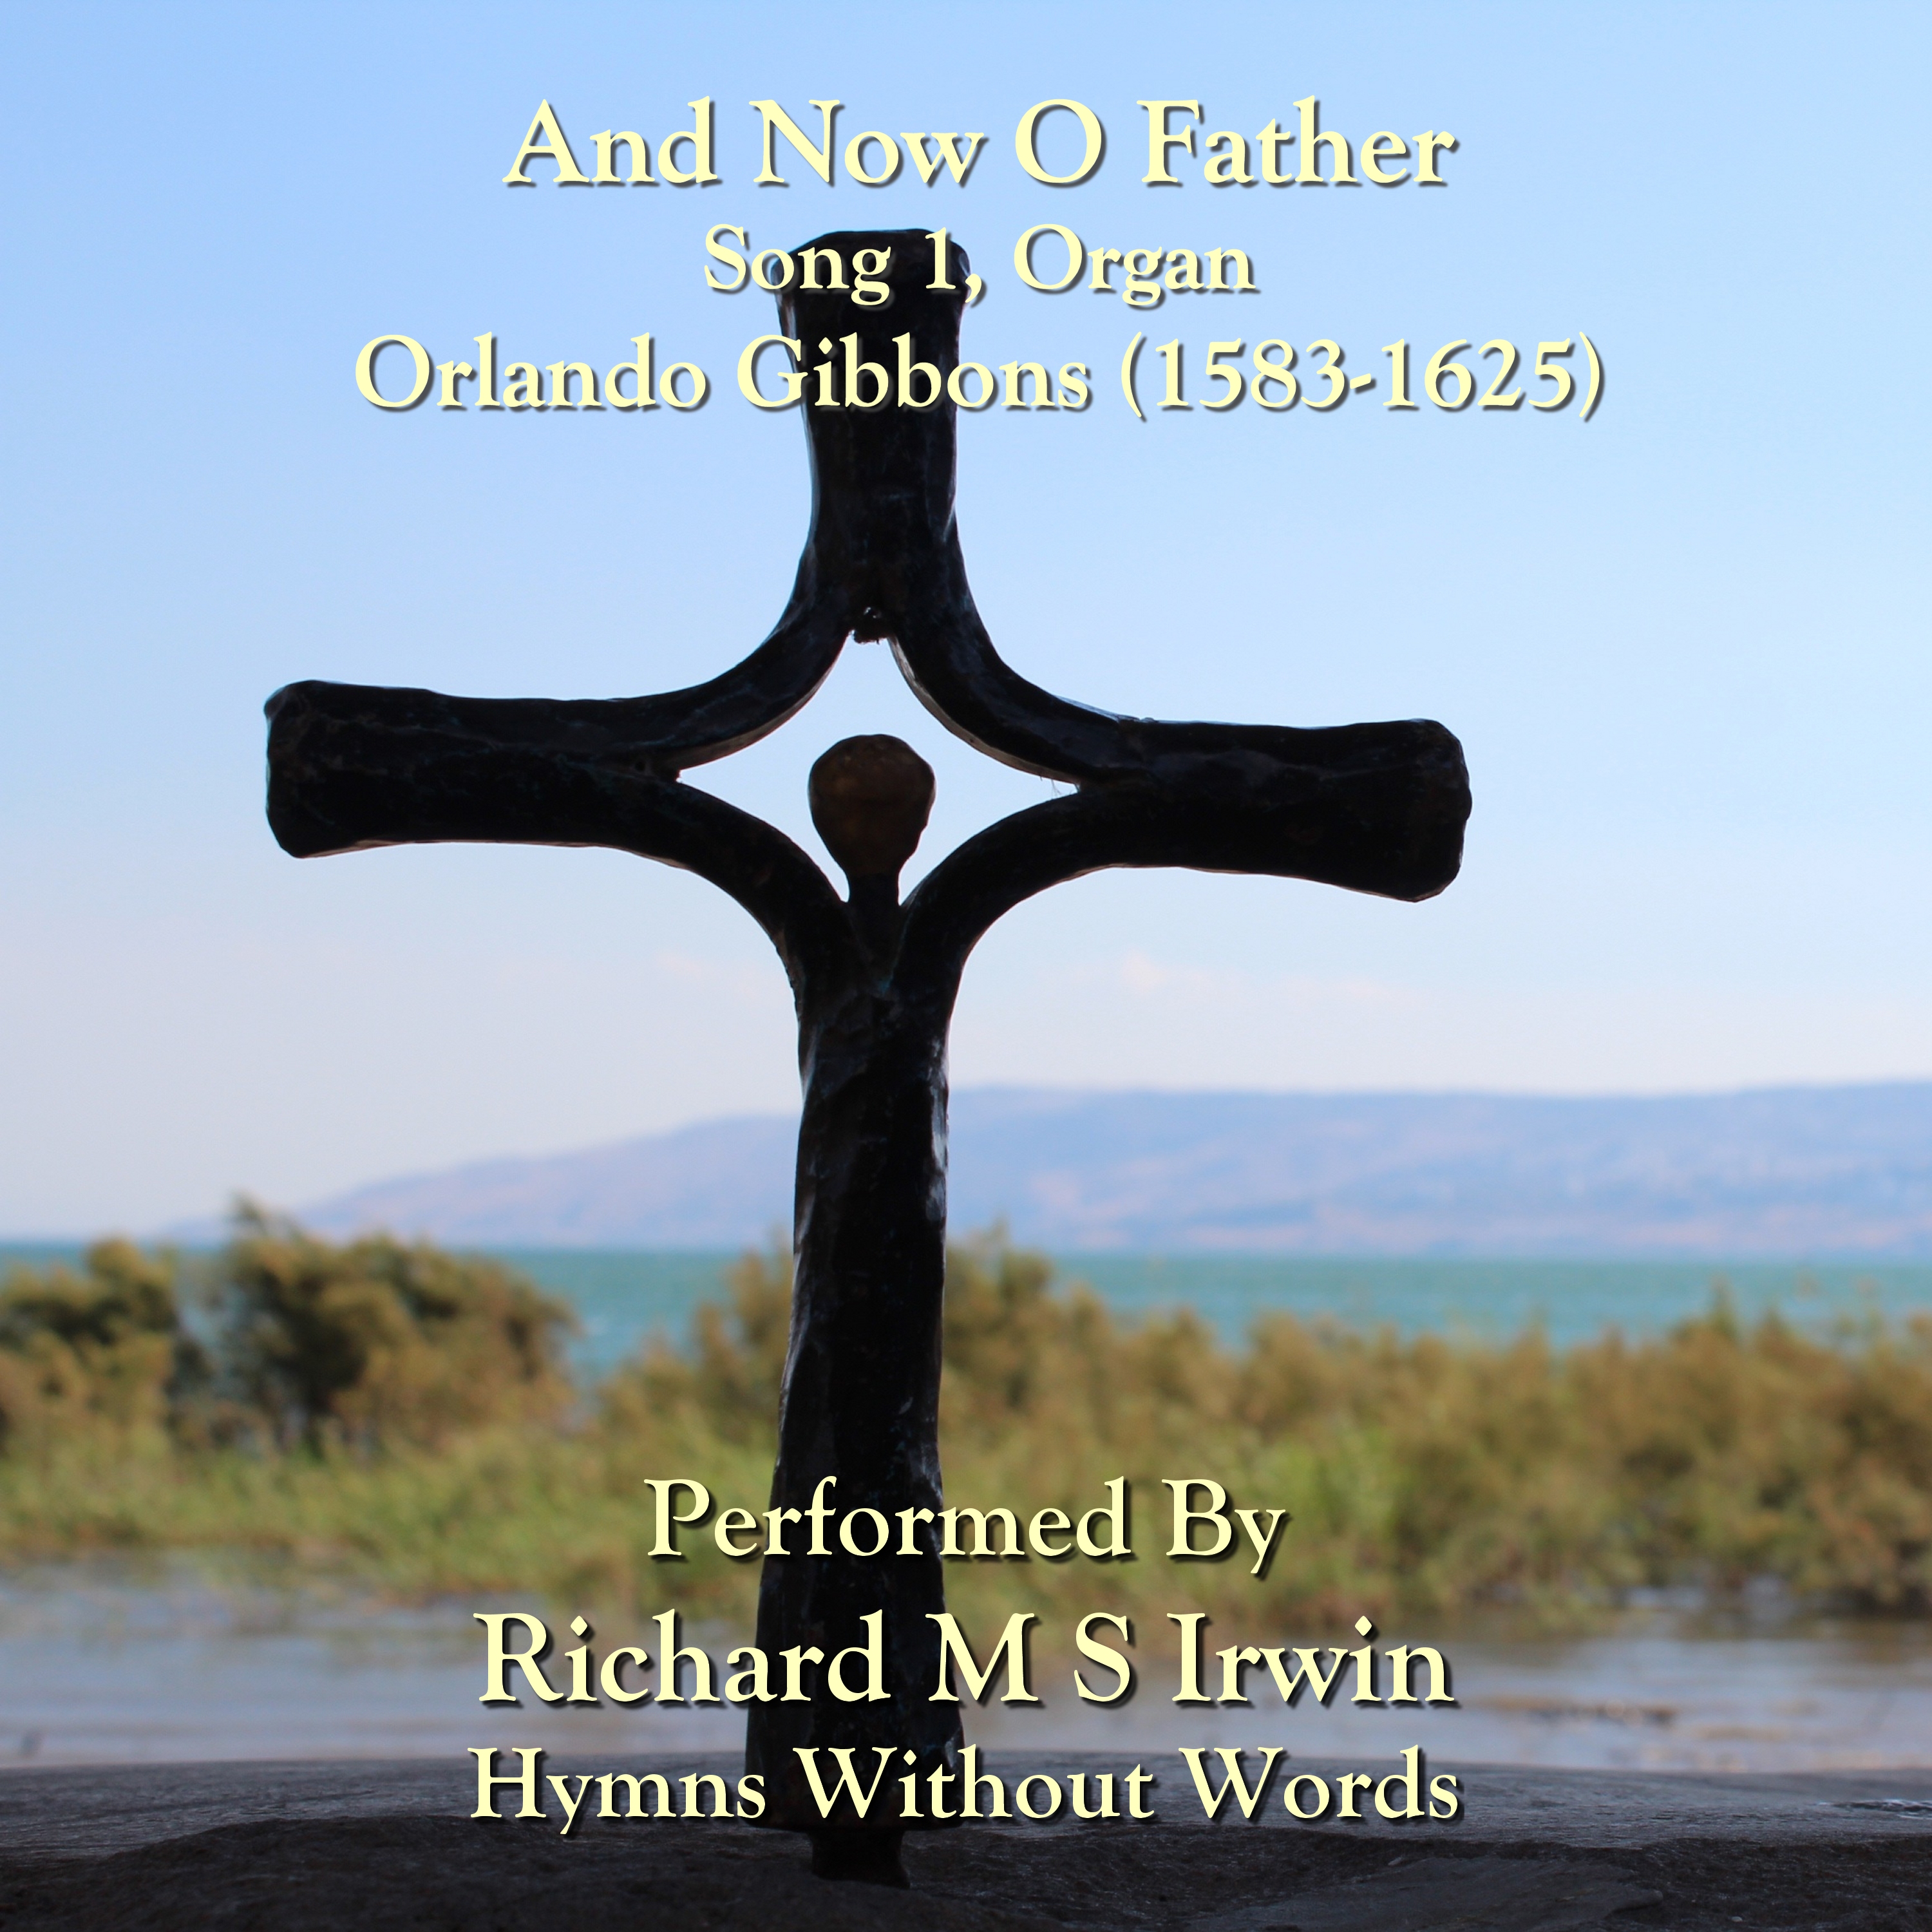 And Now O Father (Song 1, Organ, 4 Verses)